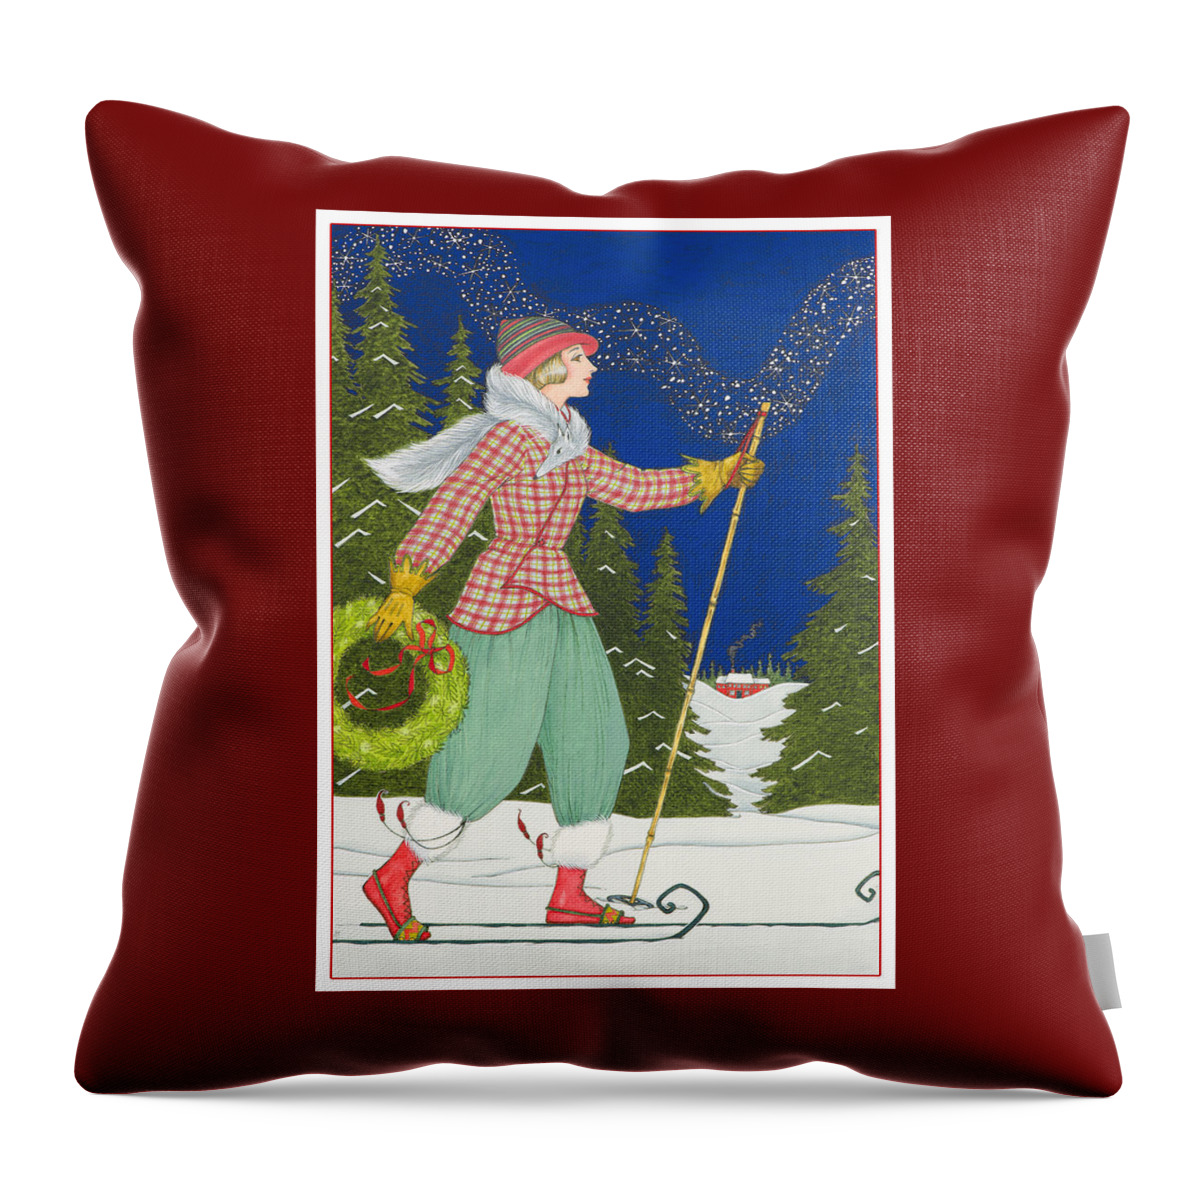 Christmas Throw Pillow featuring the painting Ski Vogue by Lynn Bywaters